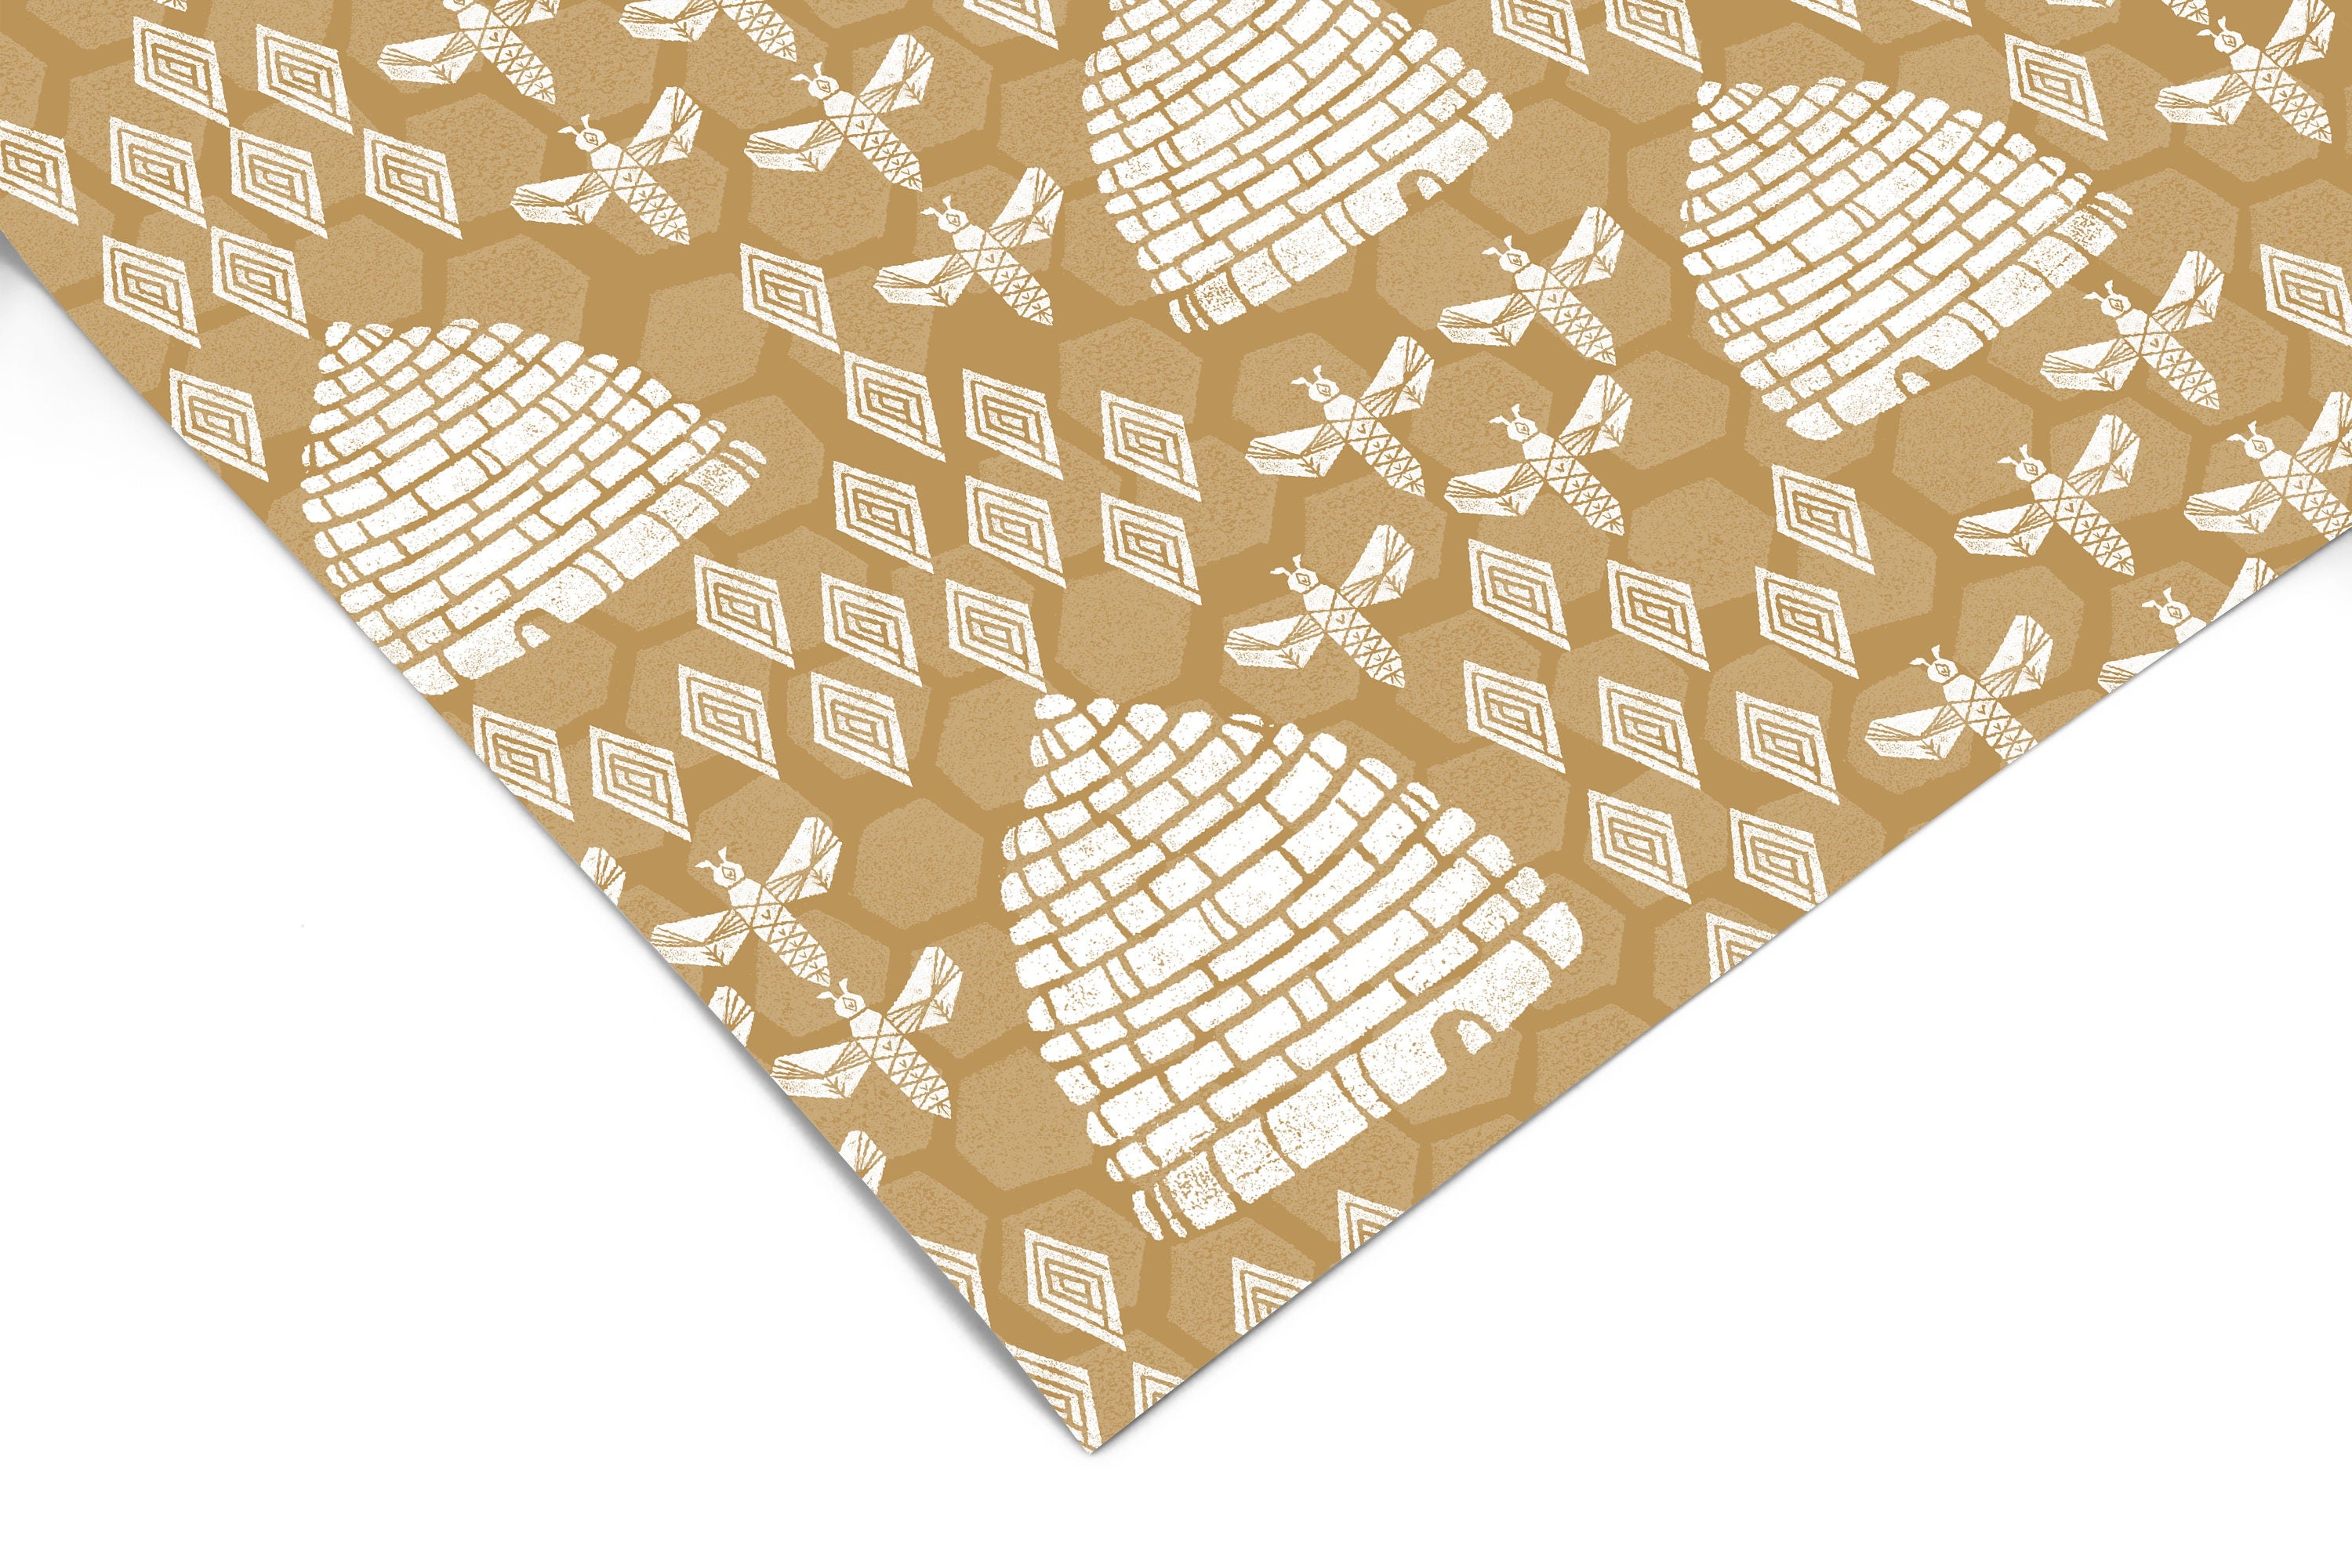 Gold Honeybee Hive Contact Paper | Shelf Liner | Drawer Liner |Peel And Stick Wallpaper | Removable Wallpaper | Peel and Stick Paper 1086 - JamesAndColors